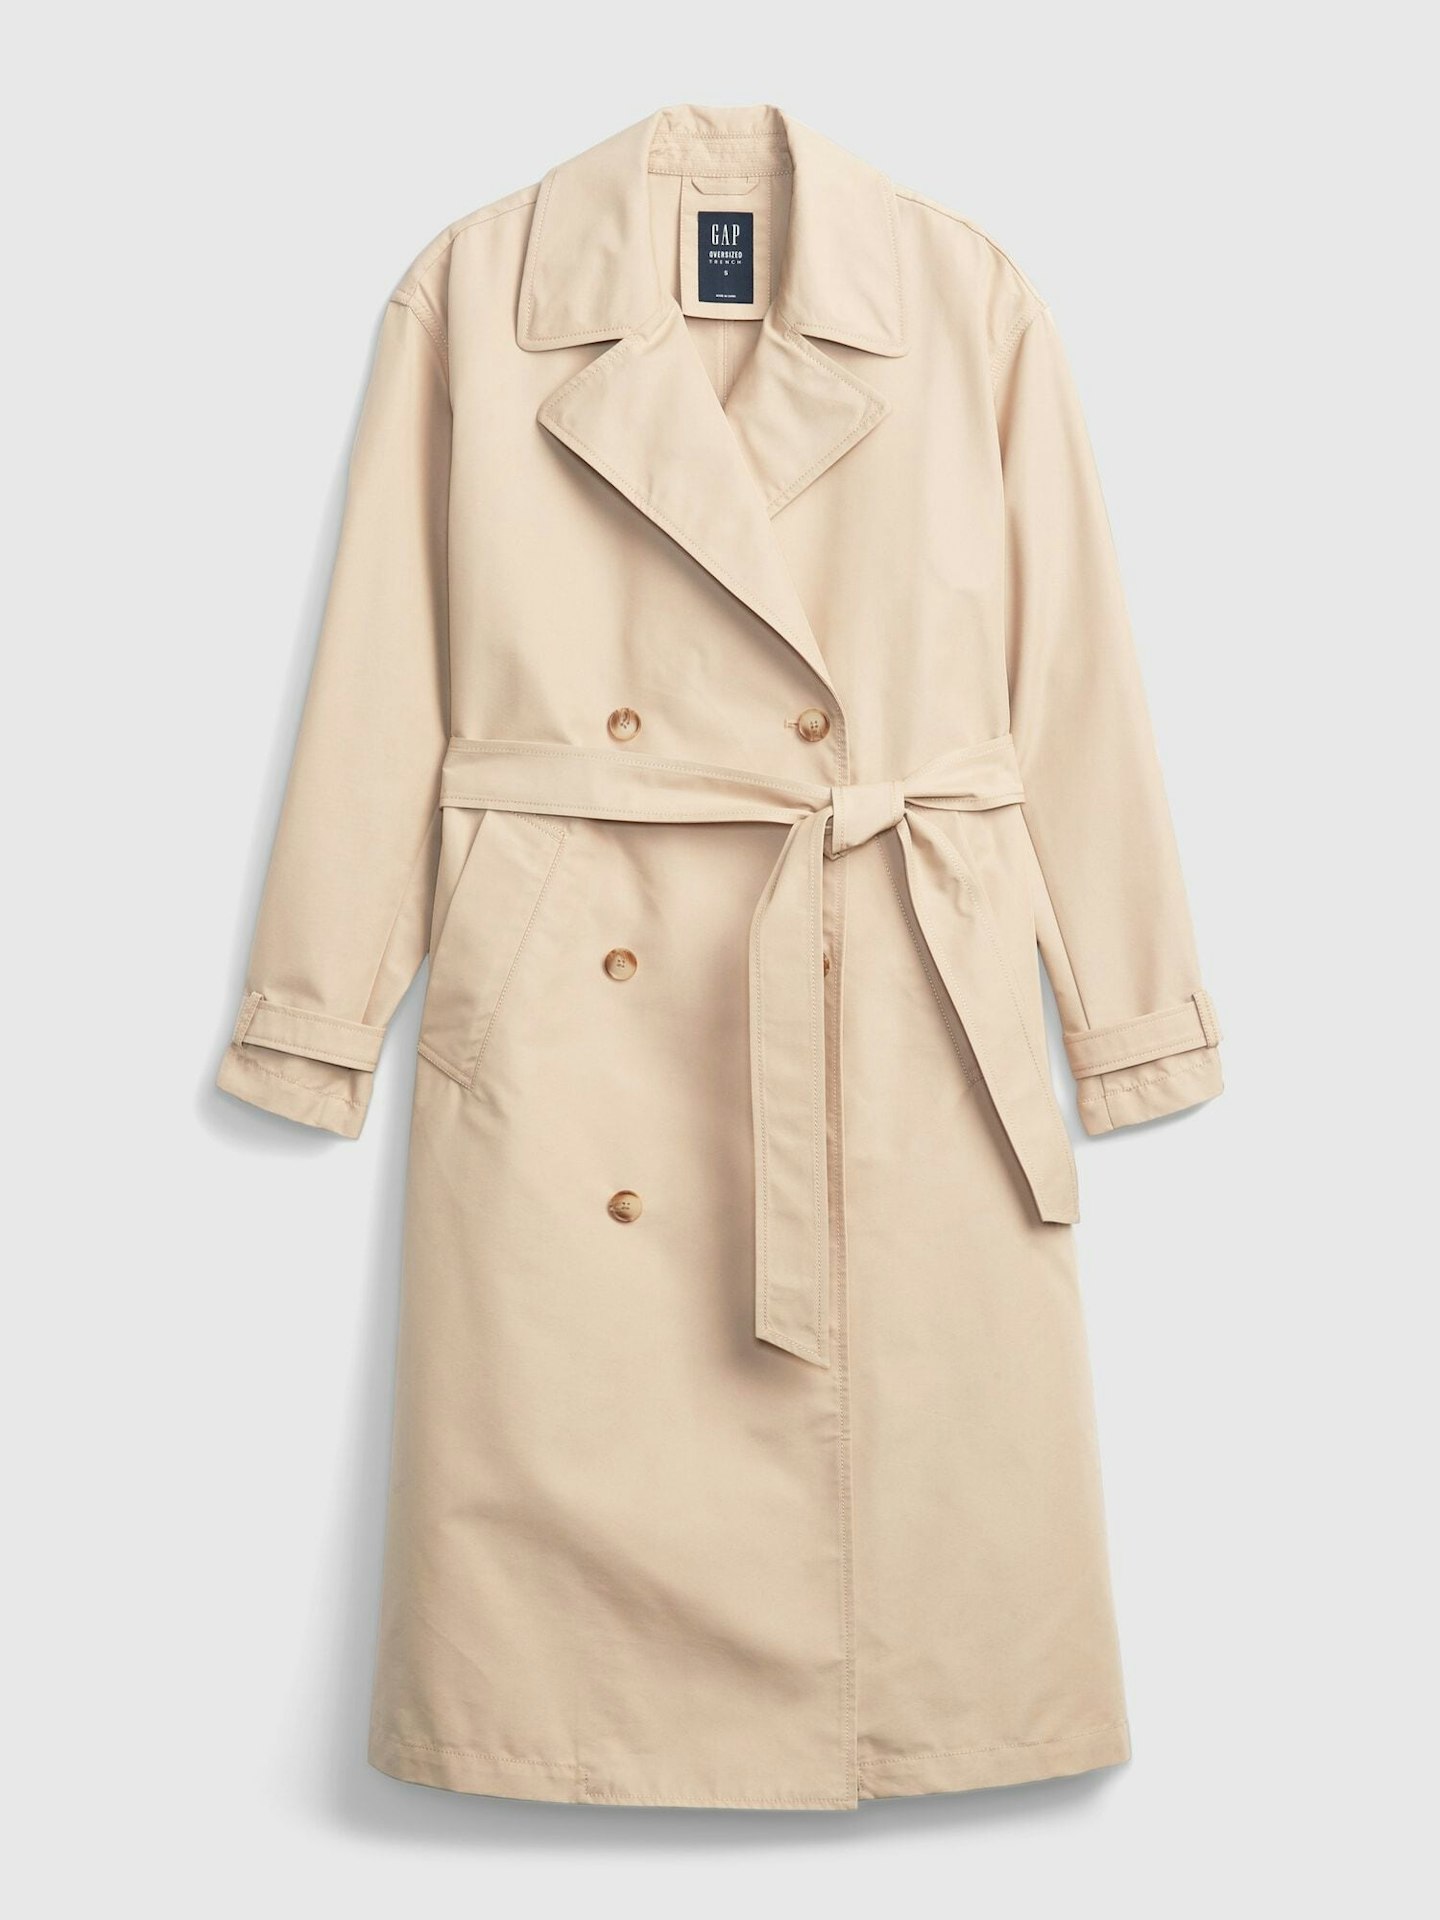 GAP, Oversized Trench Coat, WAS £99.95 NOW £69.97